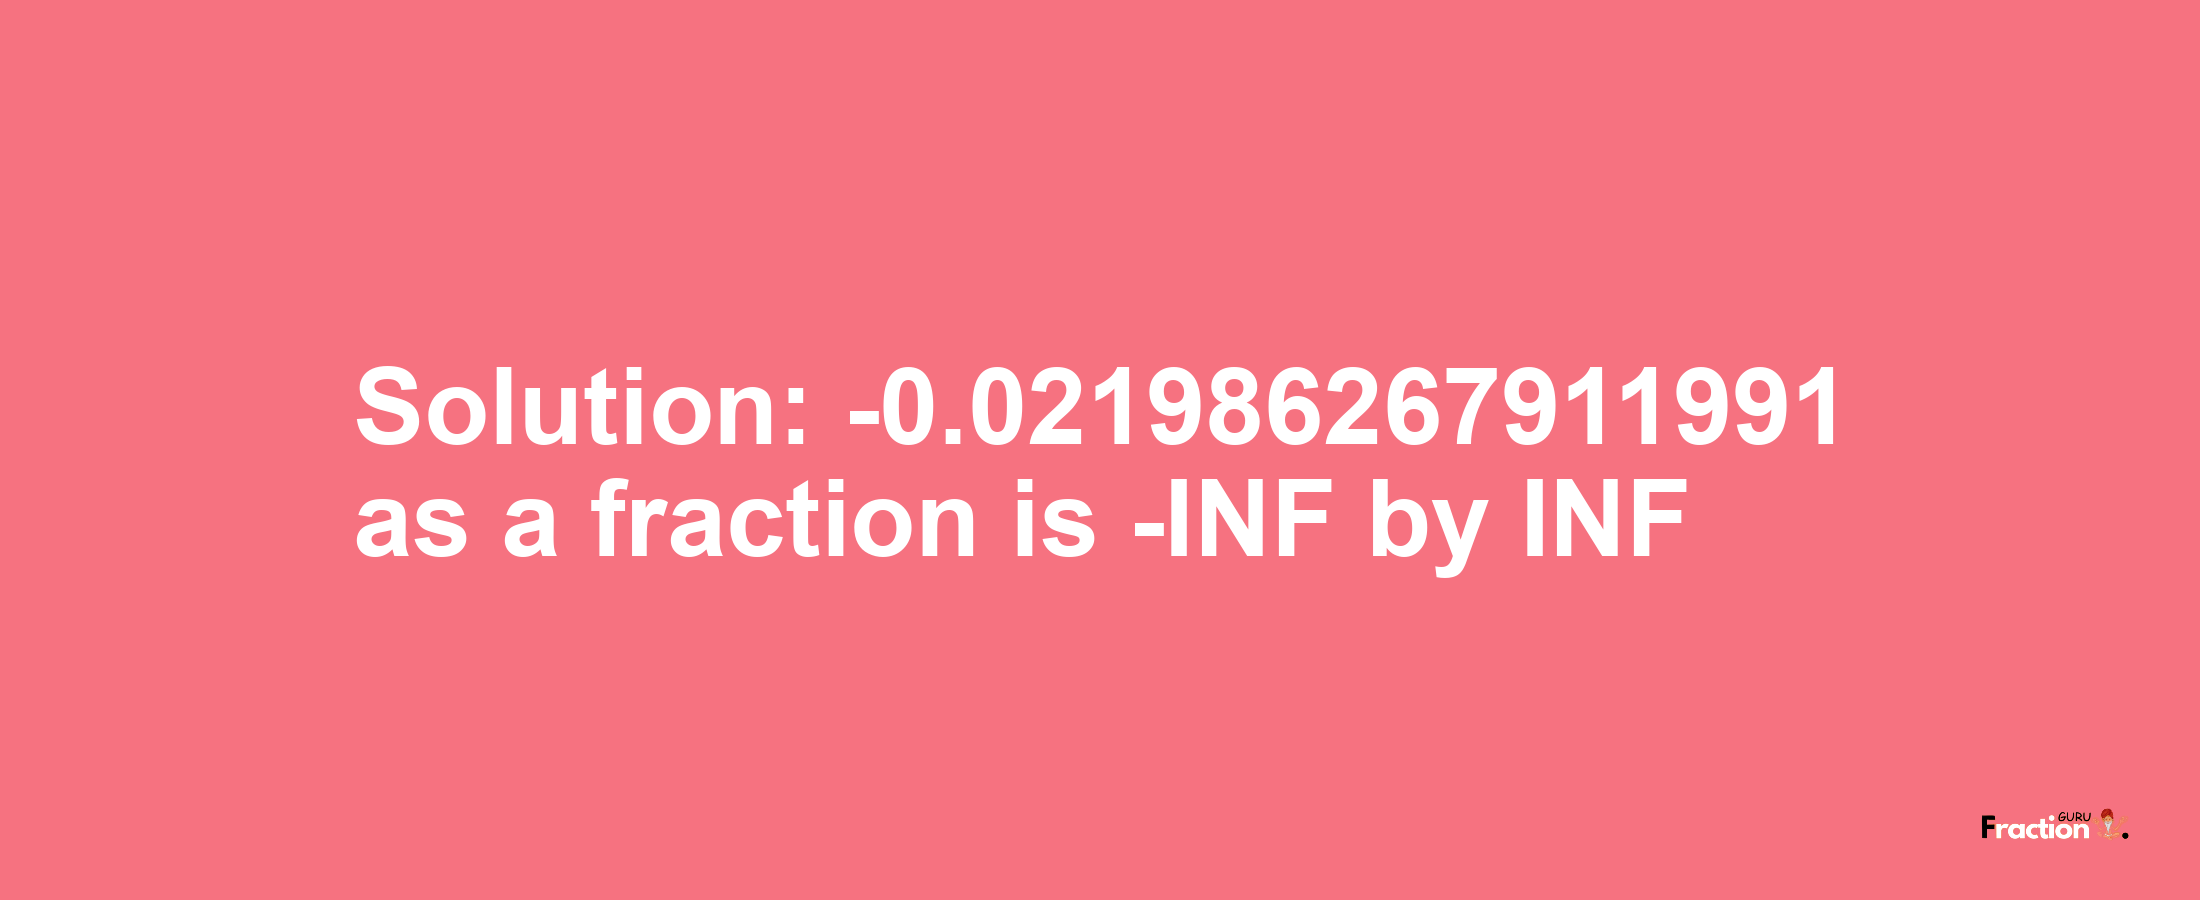 Solution:-0.021986267911991 as a fraction is -INF/INF